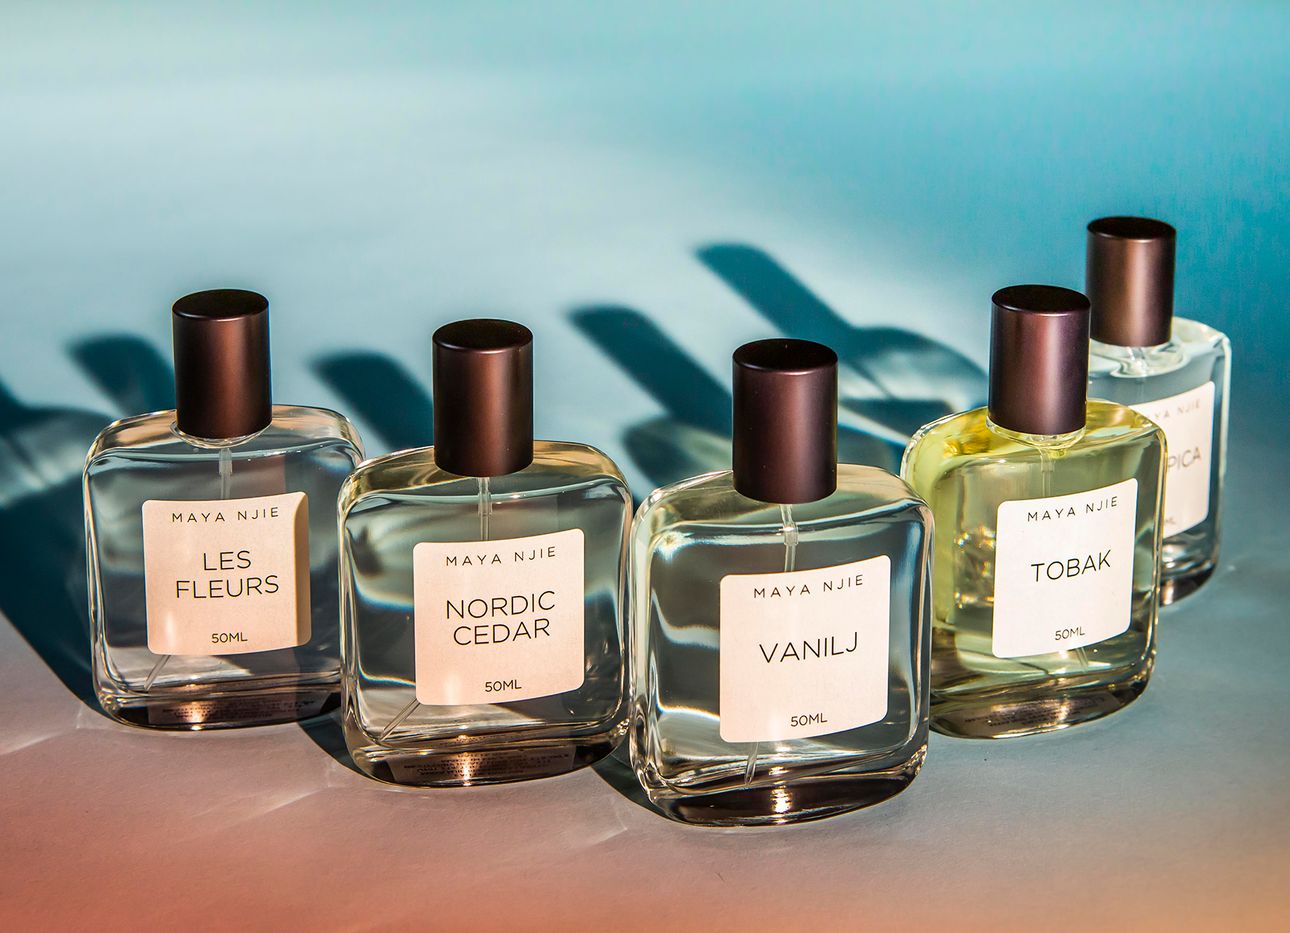 Five bottles of perfume on an ombre table